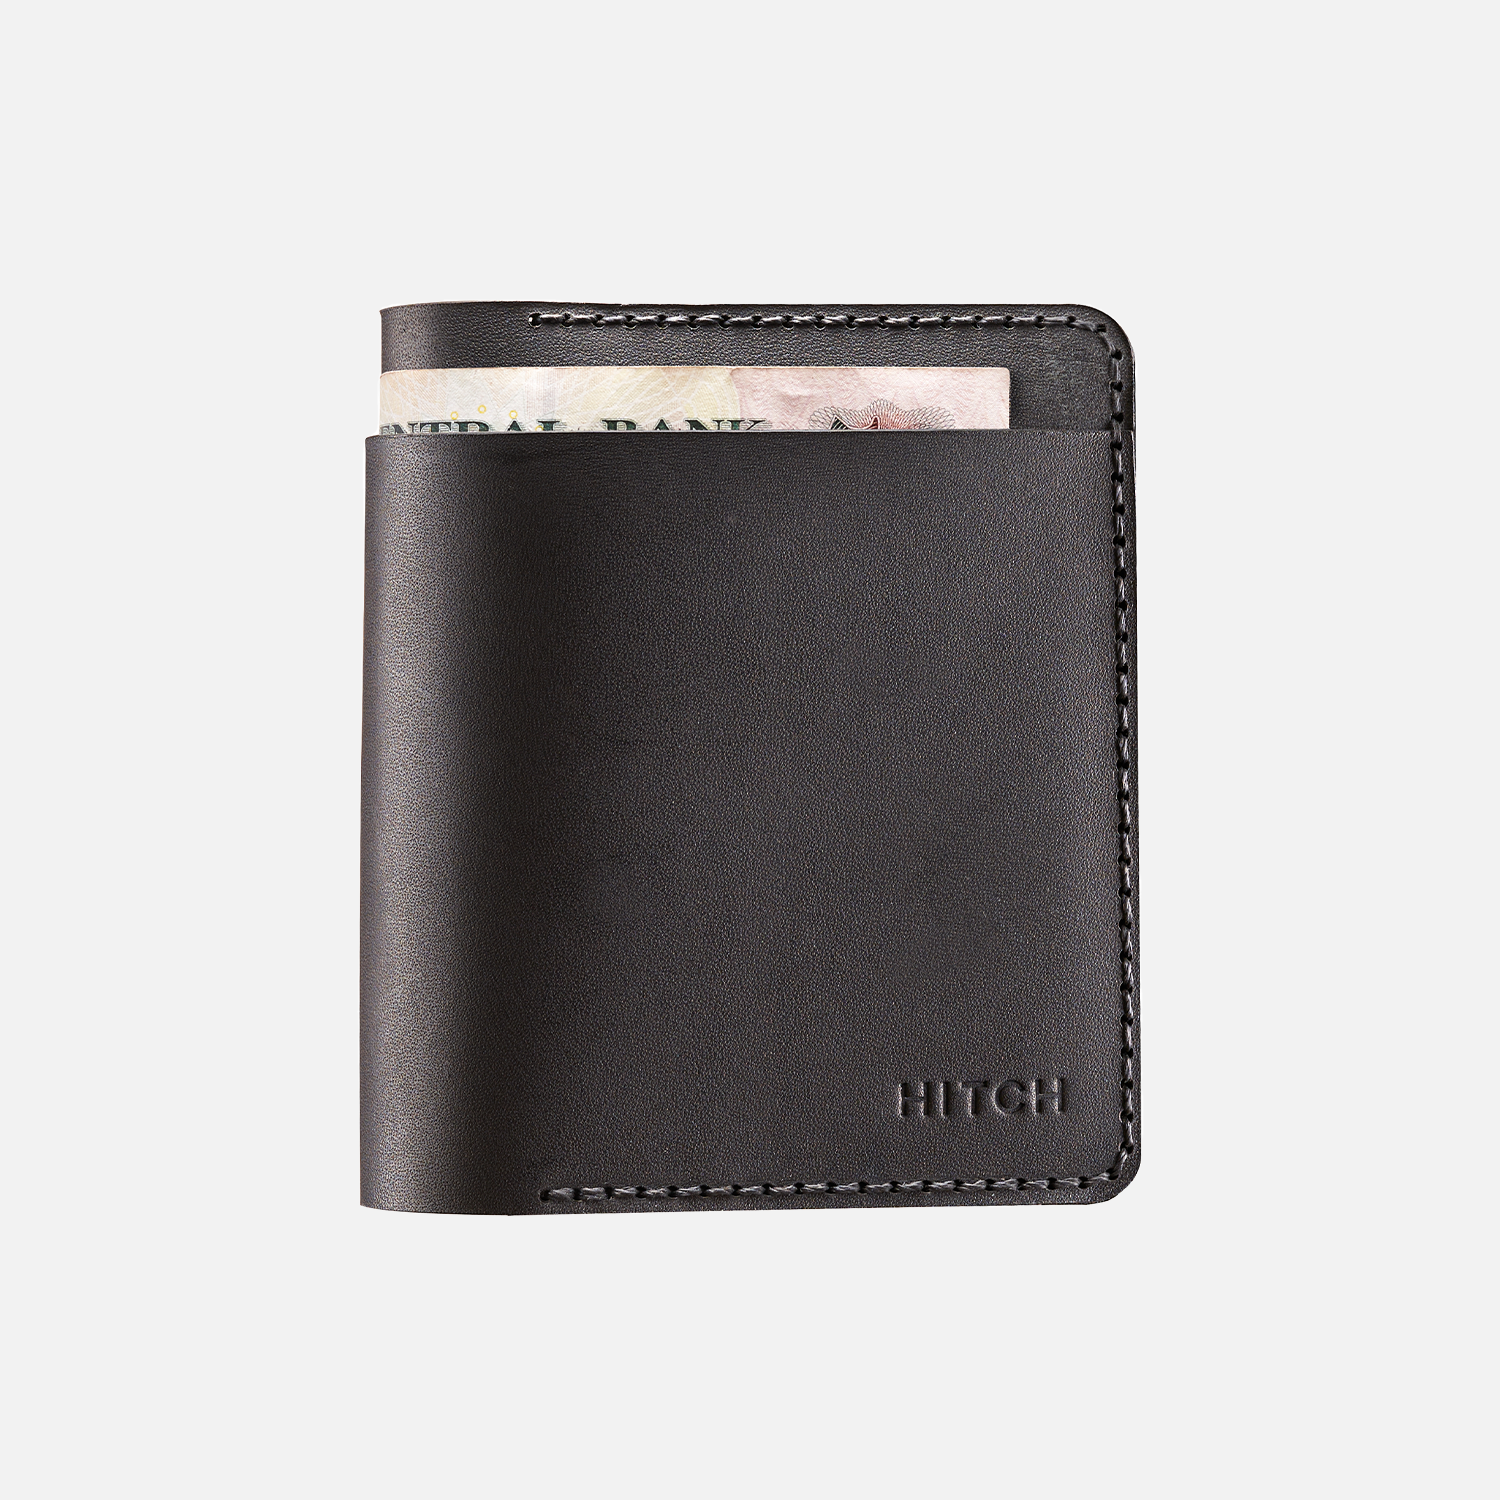 Bifold wallet offer | Together you can save more